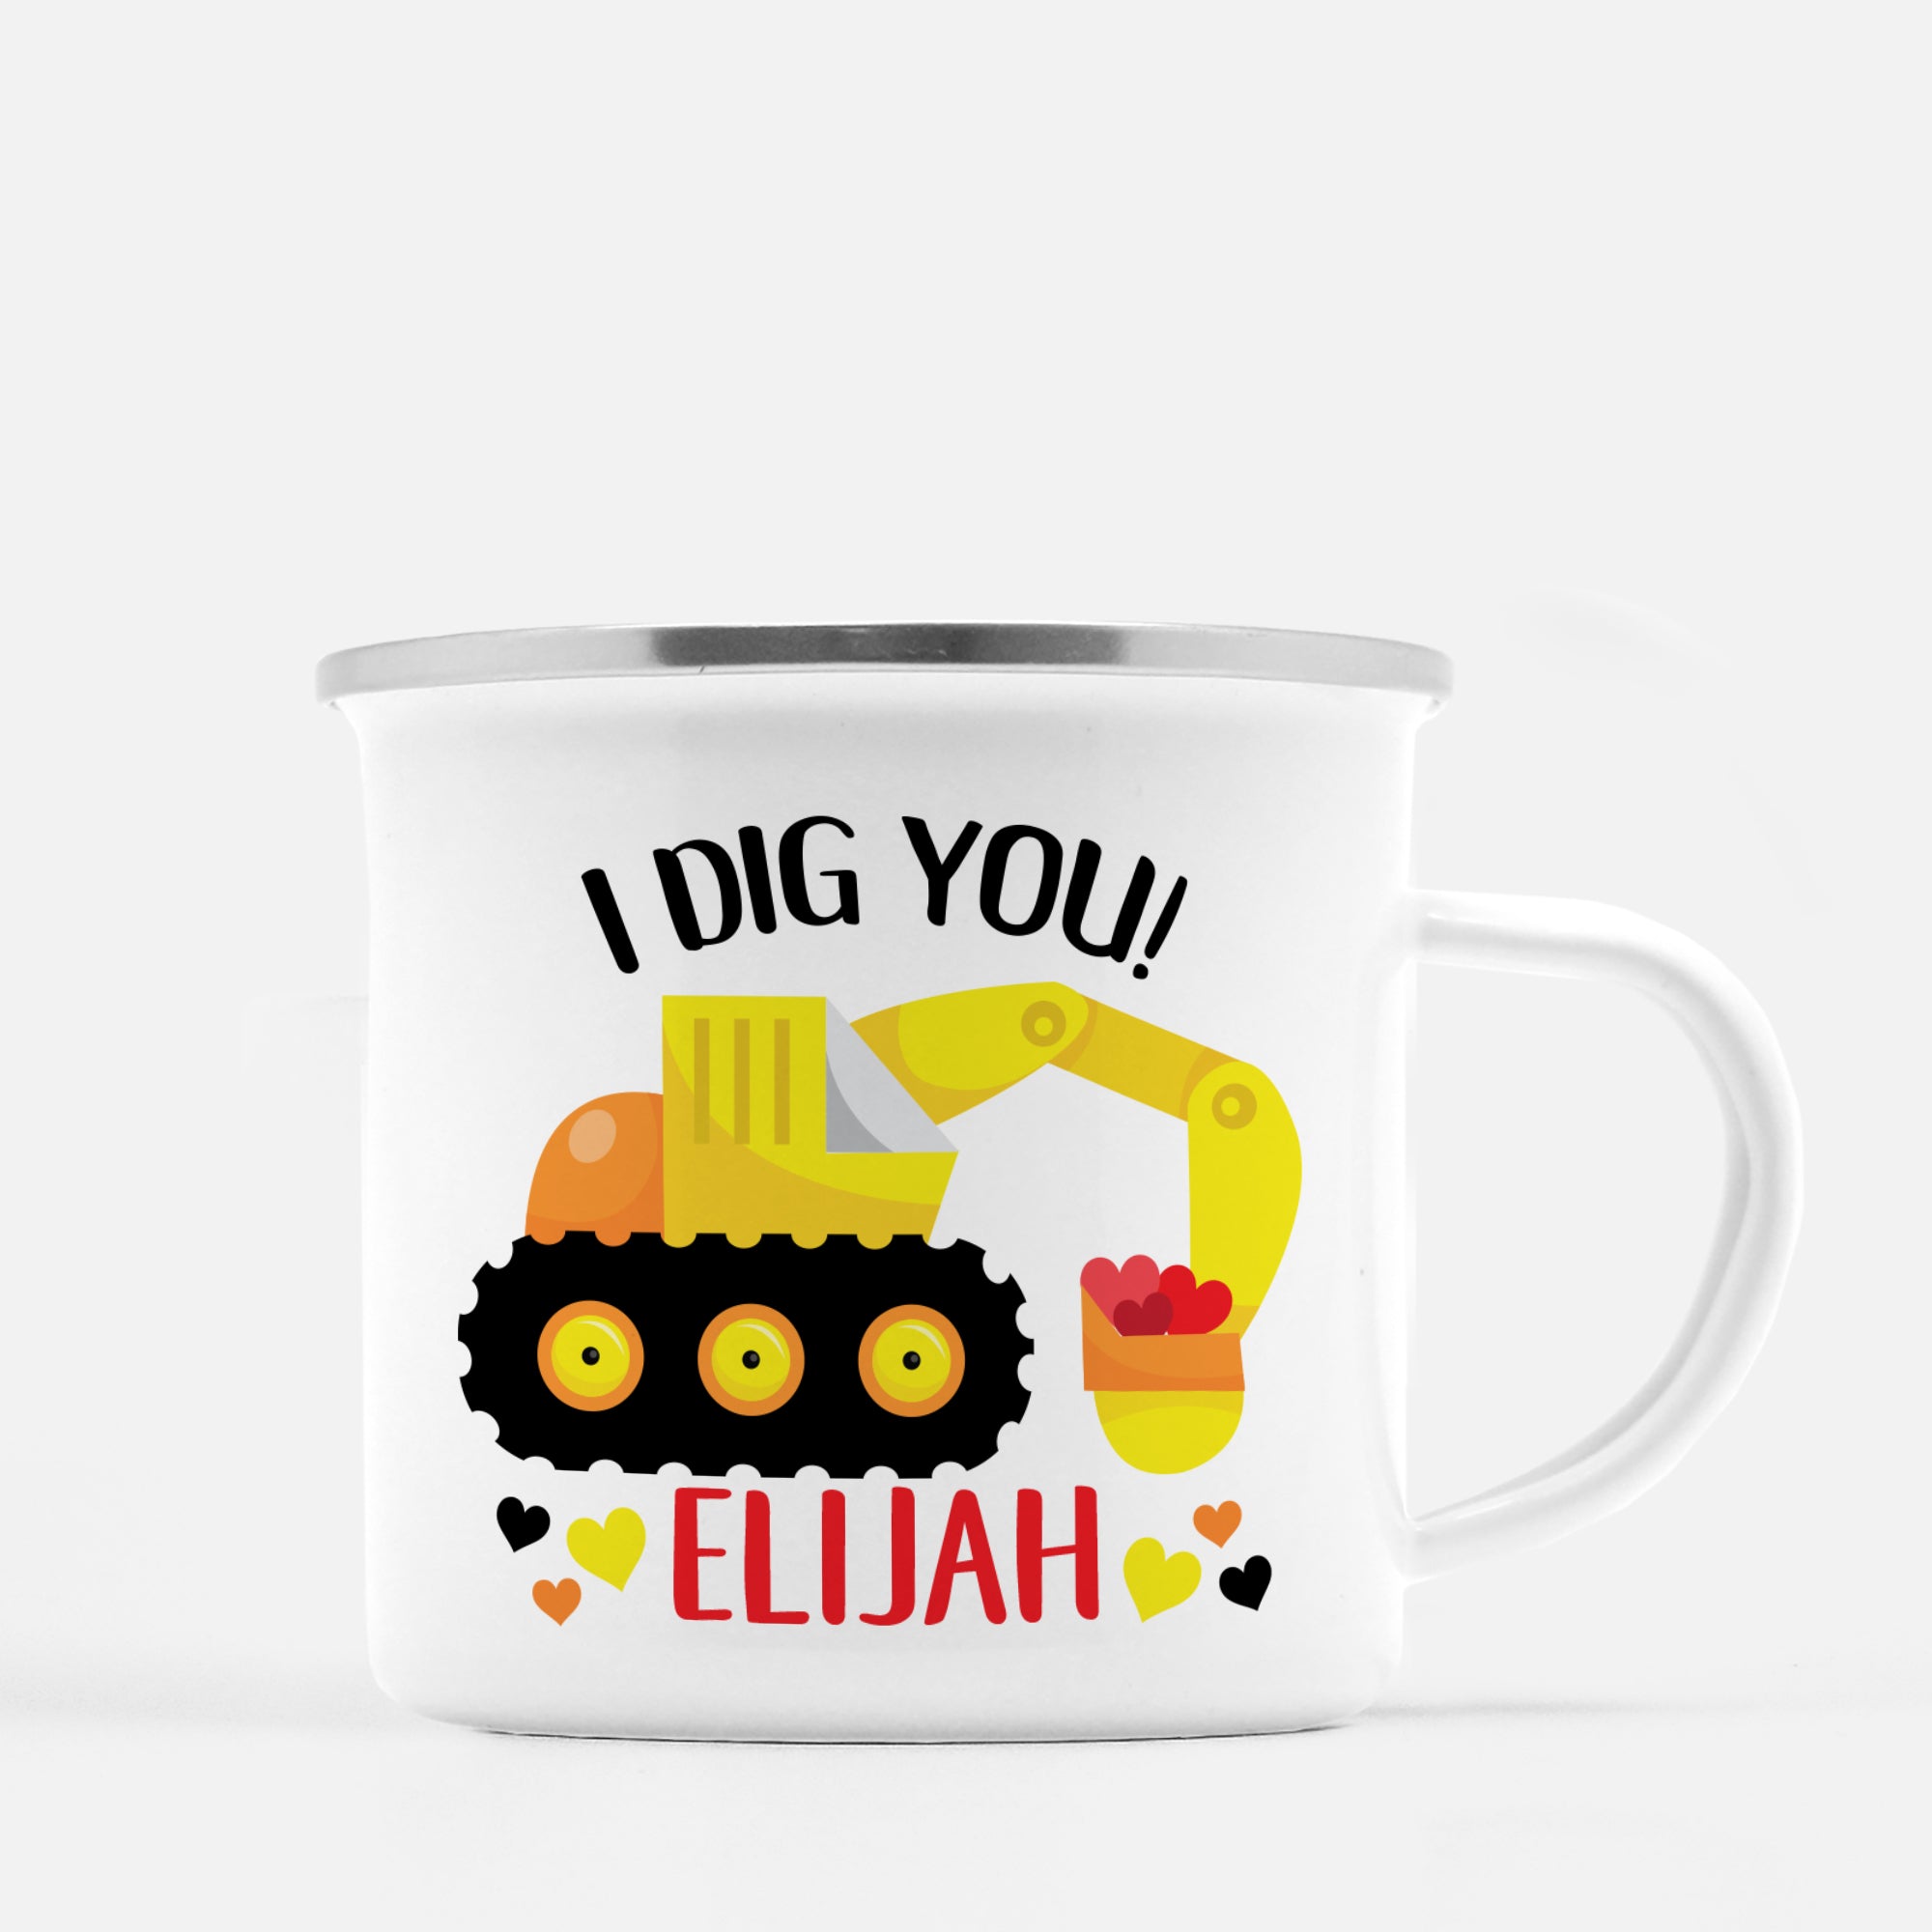 White enamel 12 oz metal camp mug with red lip | Yellow and orange Backhoe scooping up red hearts | "I Dig You" | Personalized with childs name | Valentine's Day gift